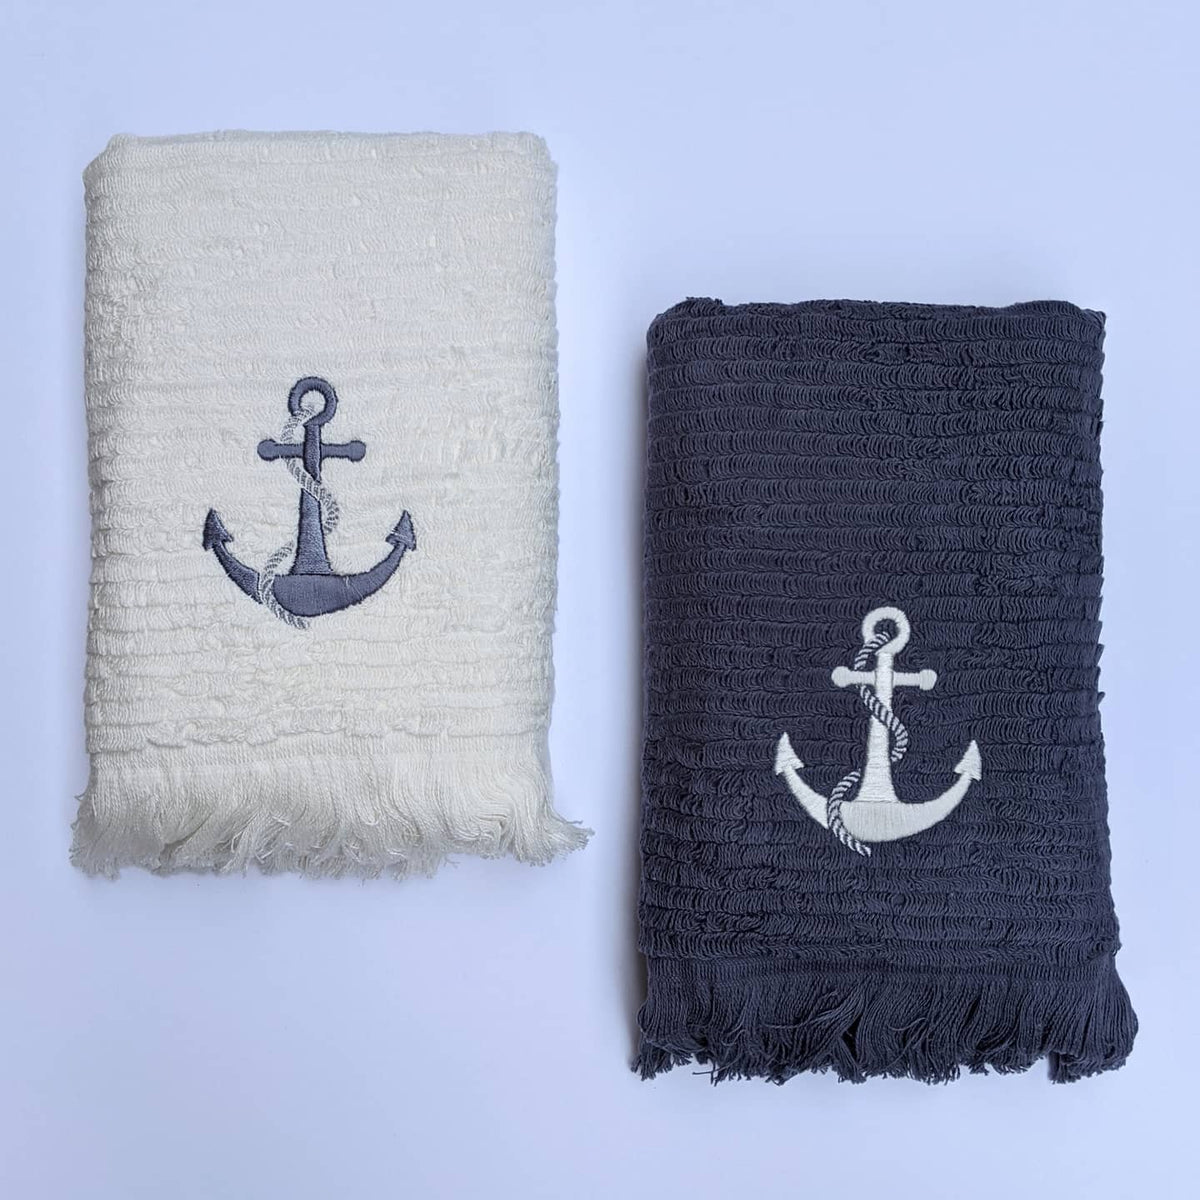 Sale - Athena, Terry Towel, Purple Gray w/Anchor Embroidery